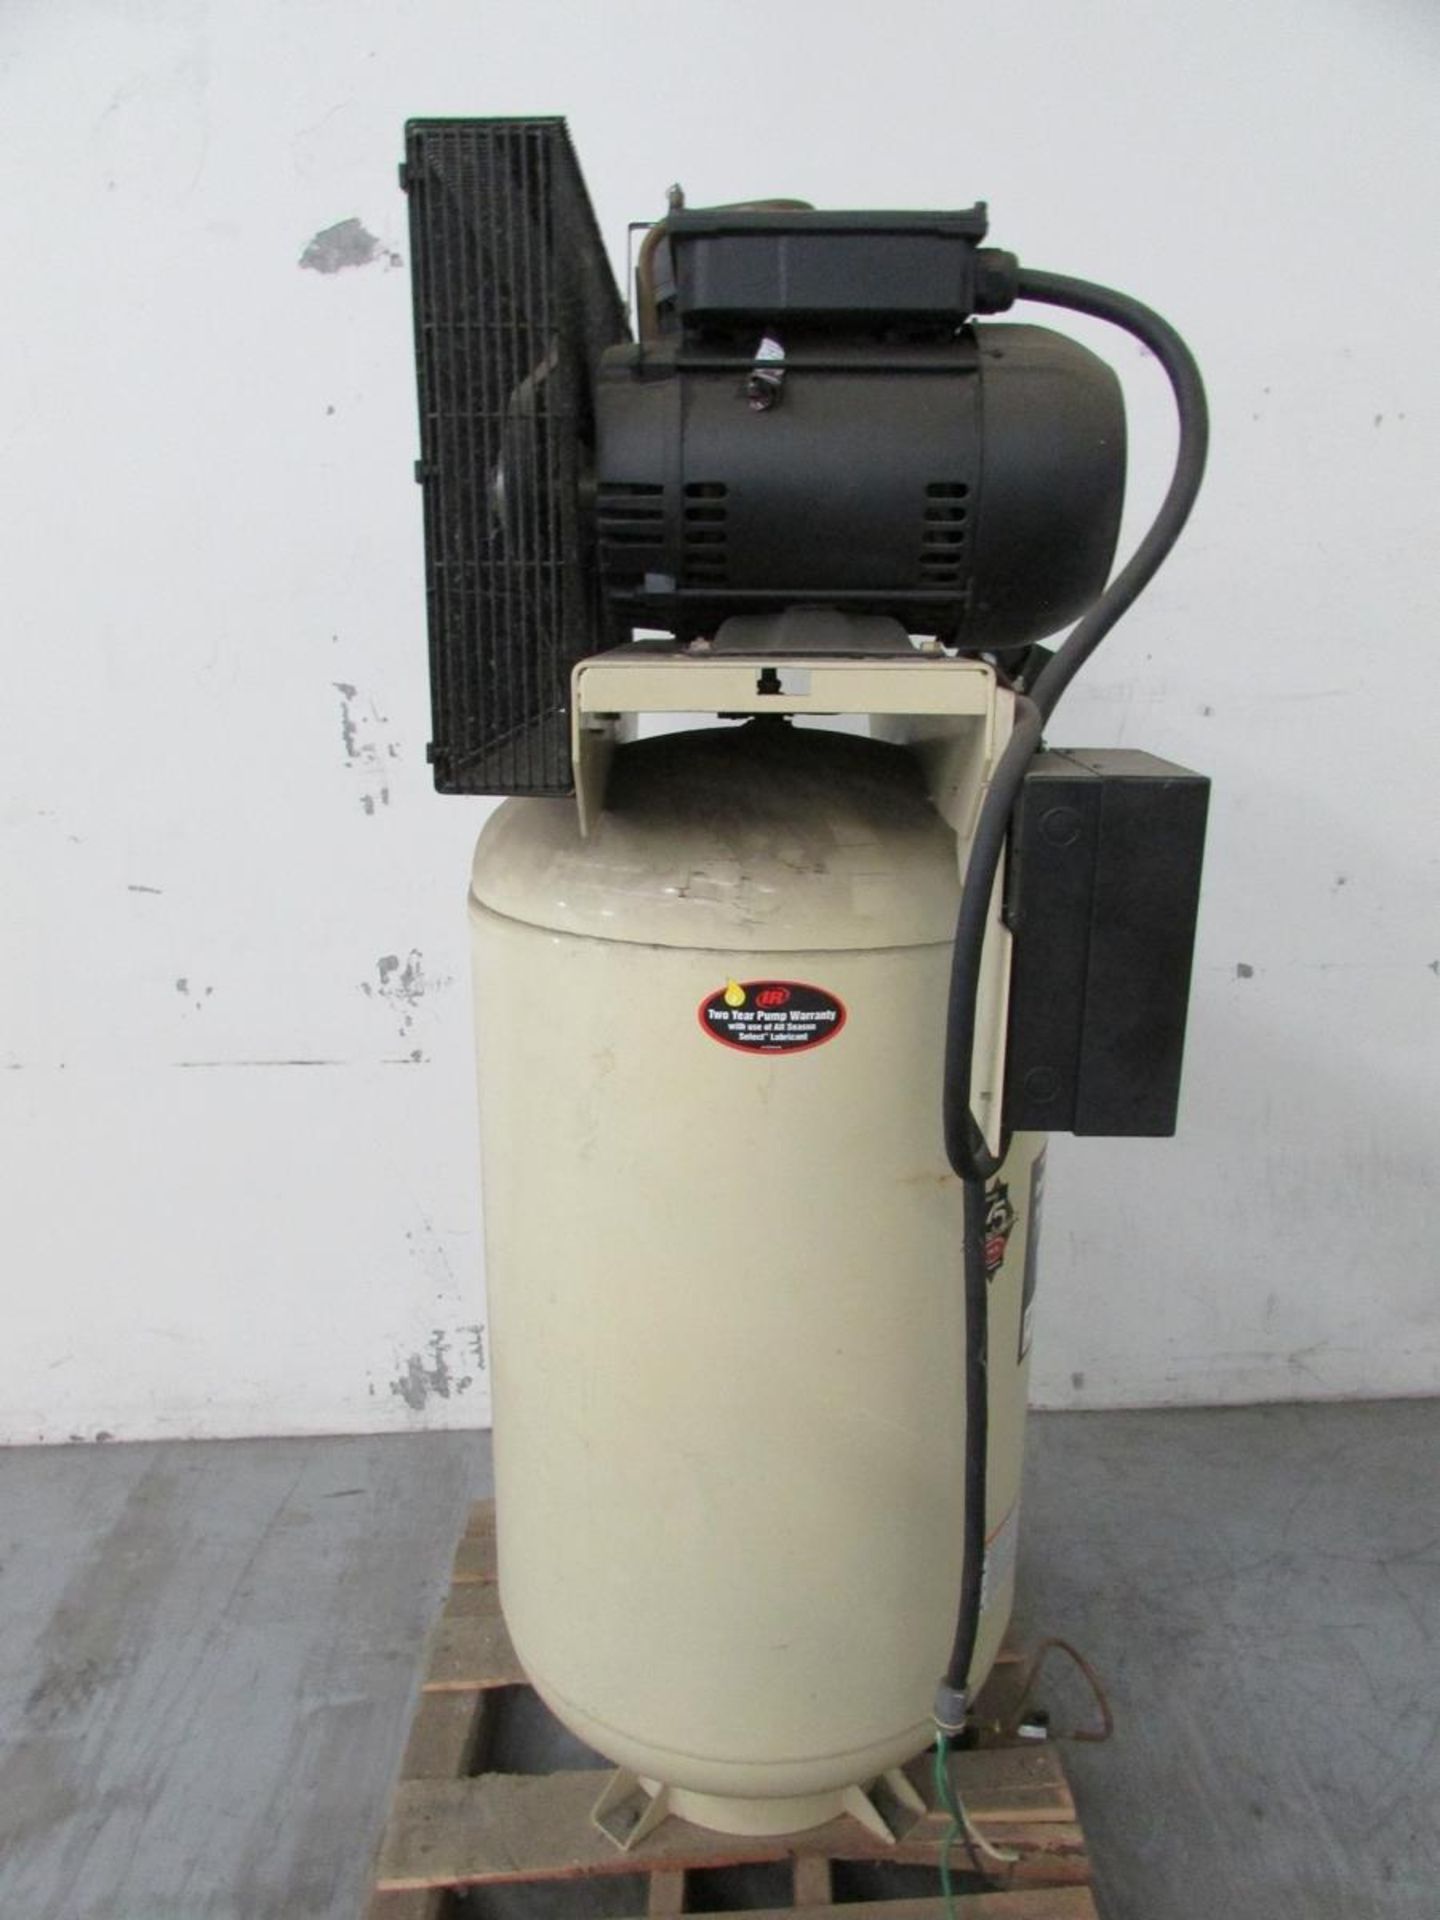 Ingersoll Rand TS7N7.5 7-1/2HP 2-Stage Vertical Tank Mounted Air Compressor - Image 16 of 20